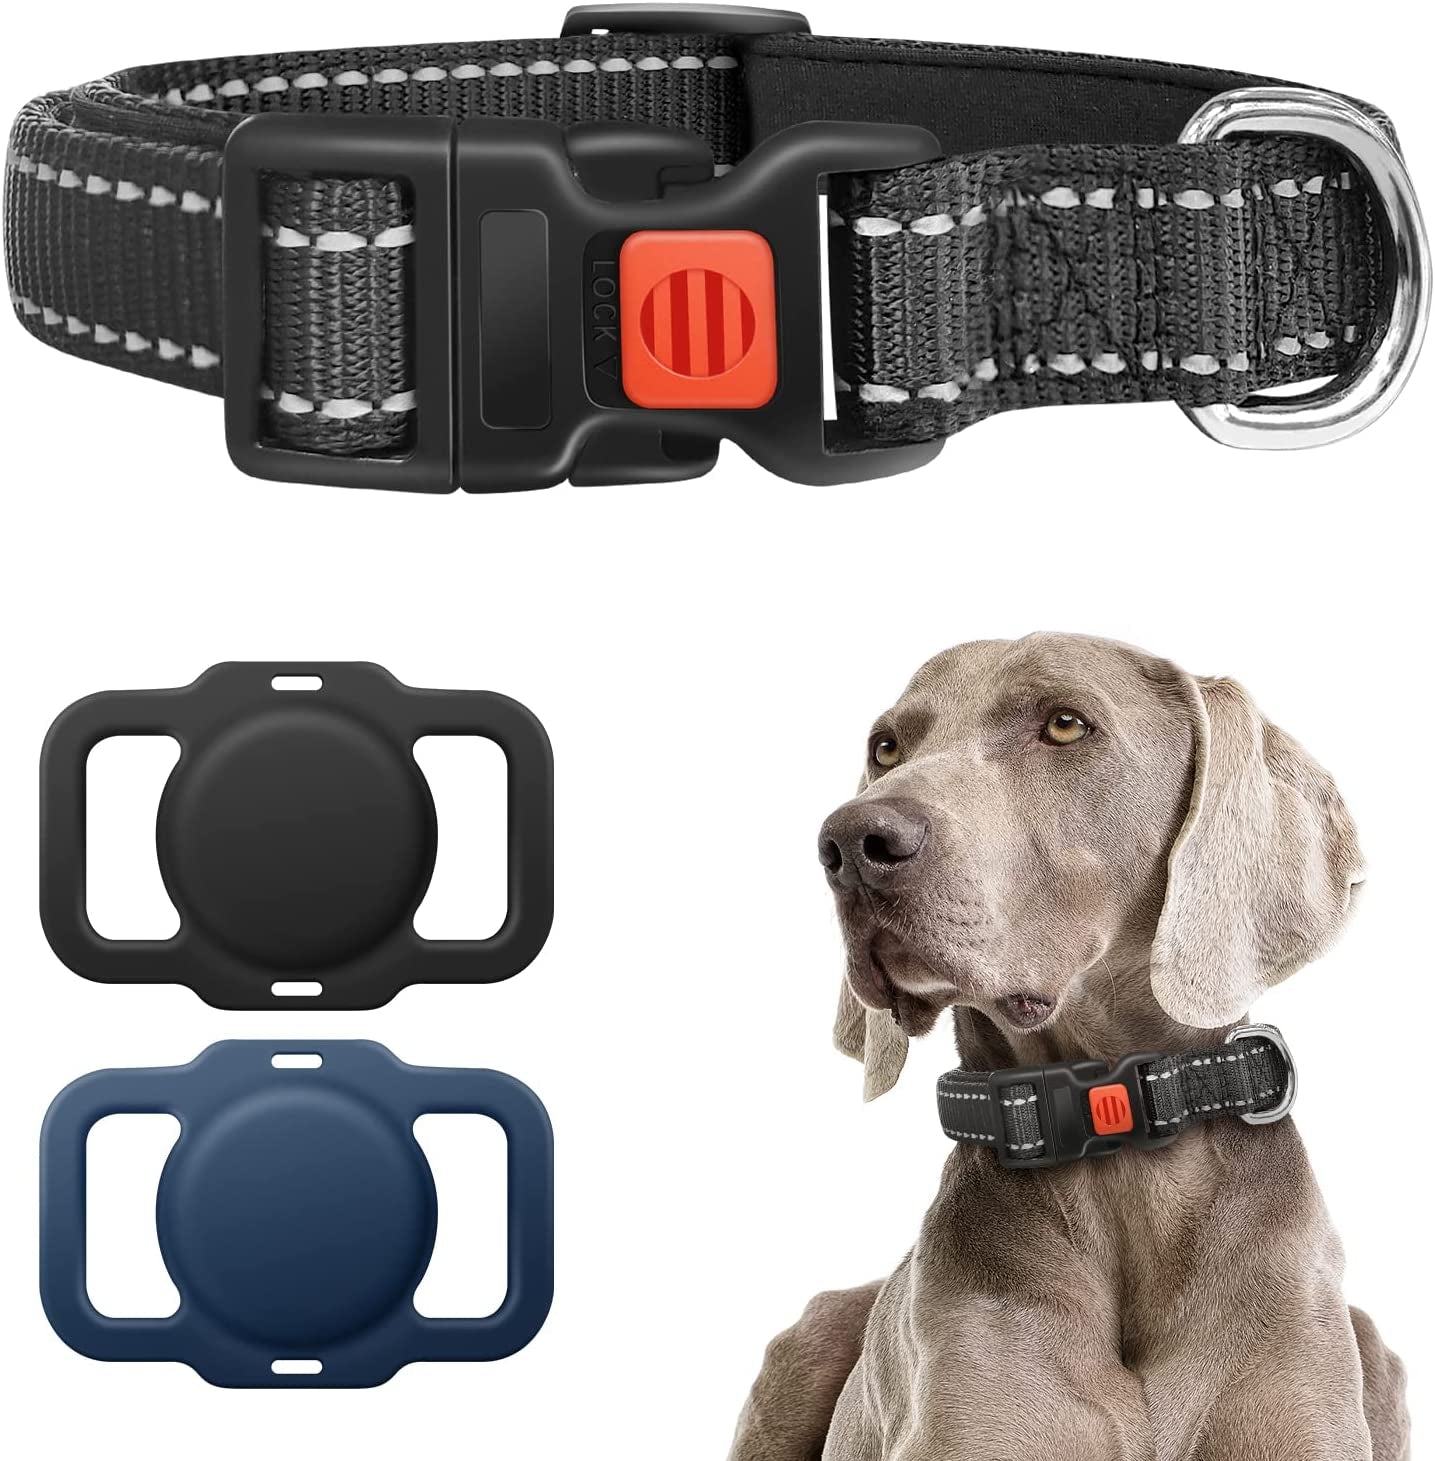 Airtag Dog Collar Holder, Protective Airtag Case for Dog Collar, Airtag Loop for GPS Dog Tracker, Dog Trackers for Apple Iphone, 2 Pack Airtag Pet, Dog Airtag Holder